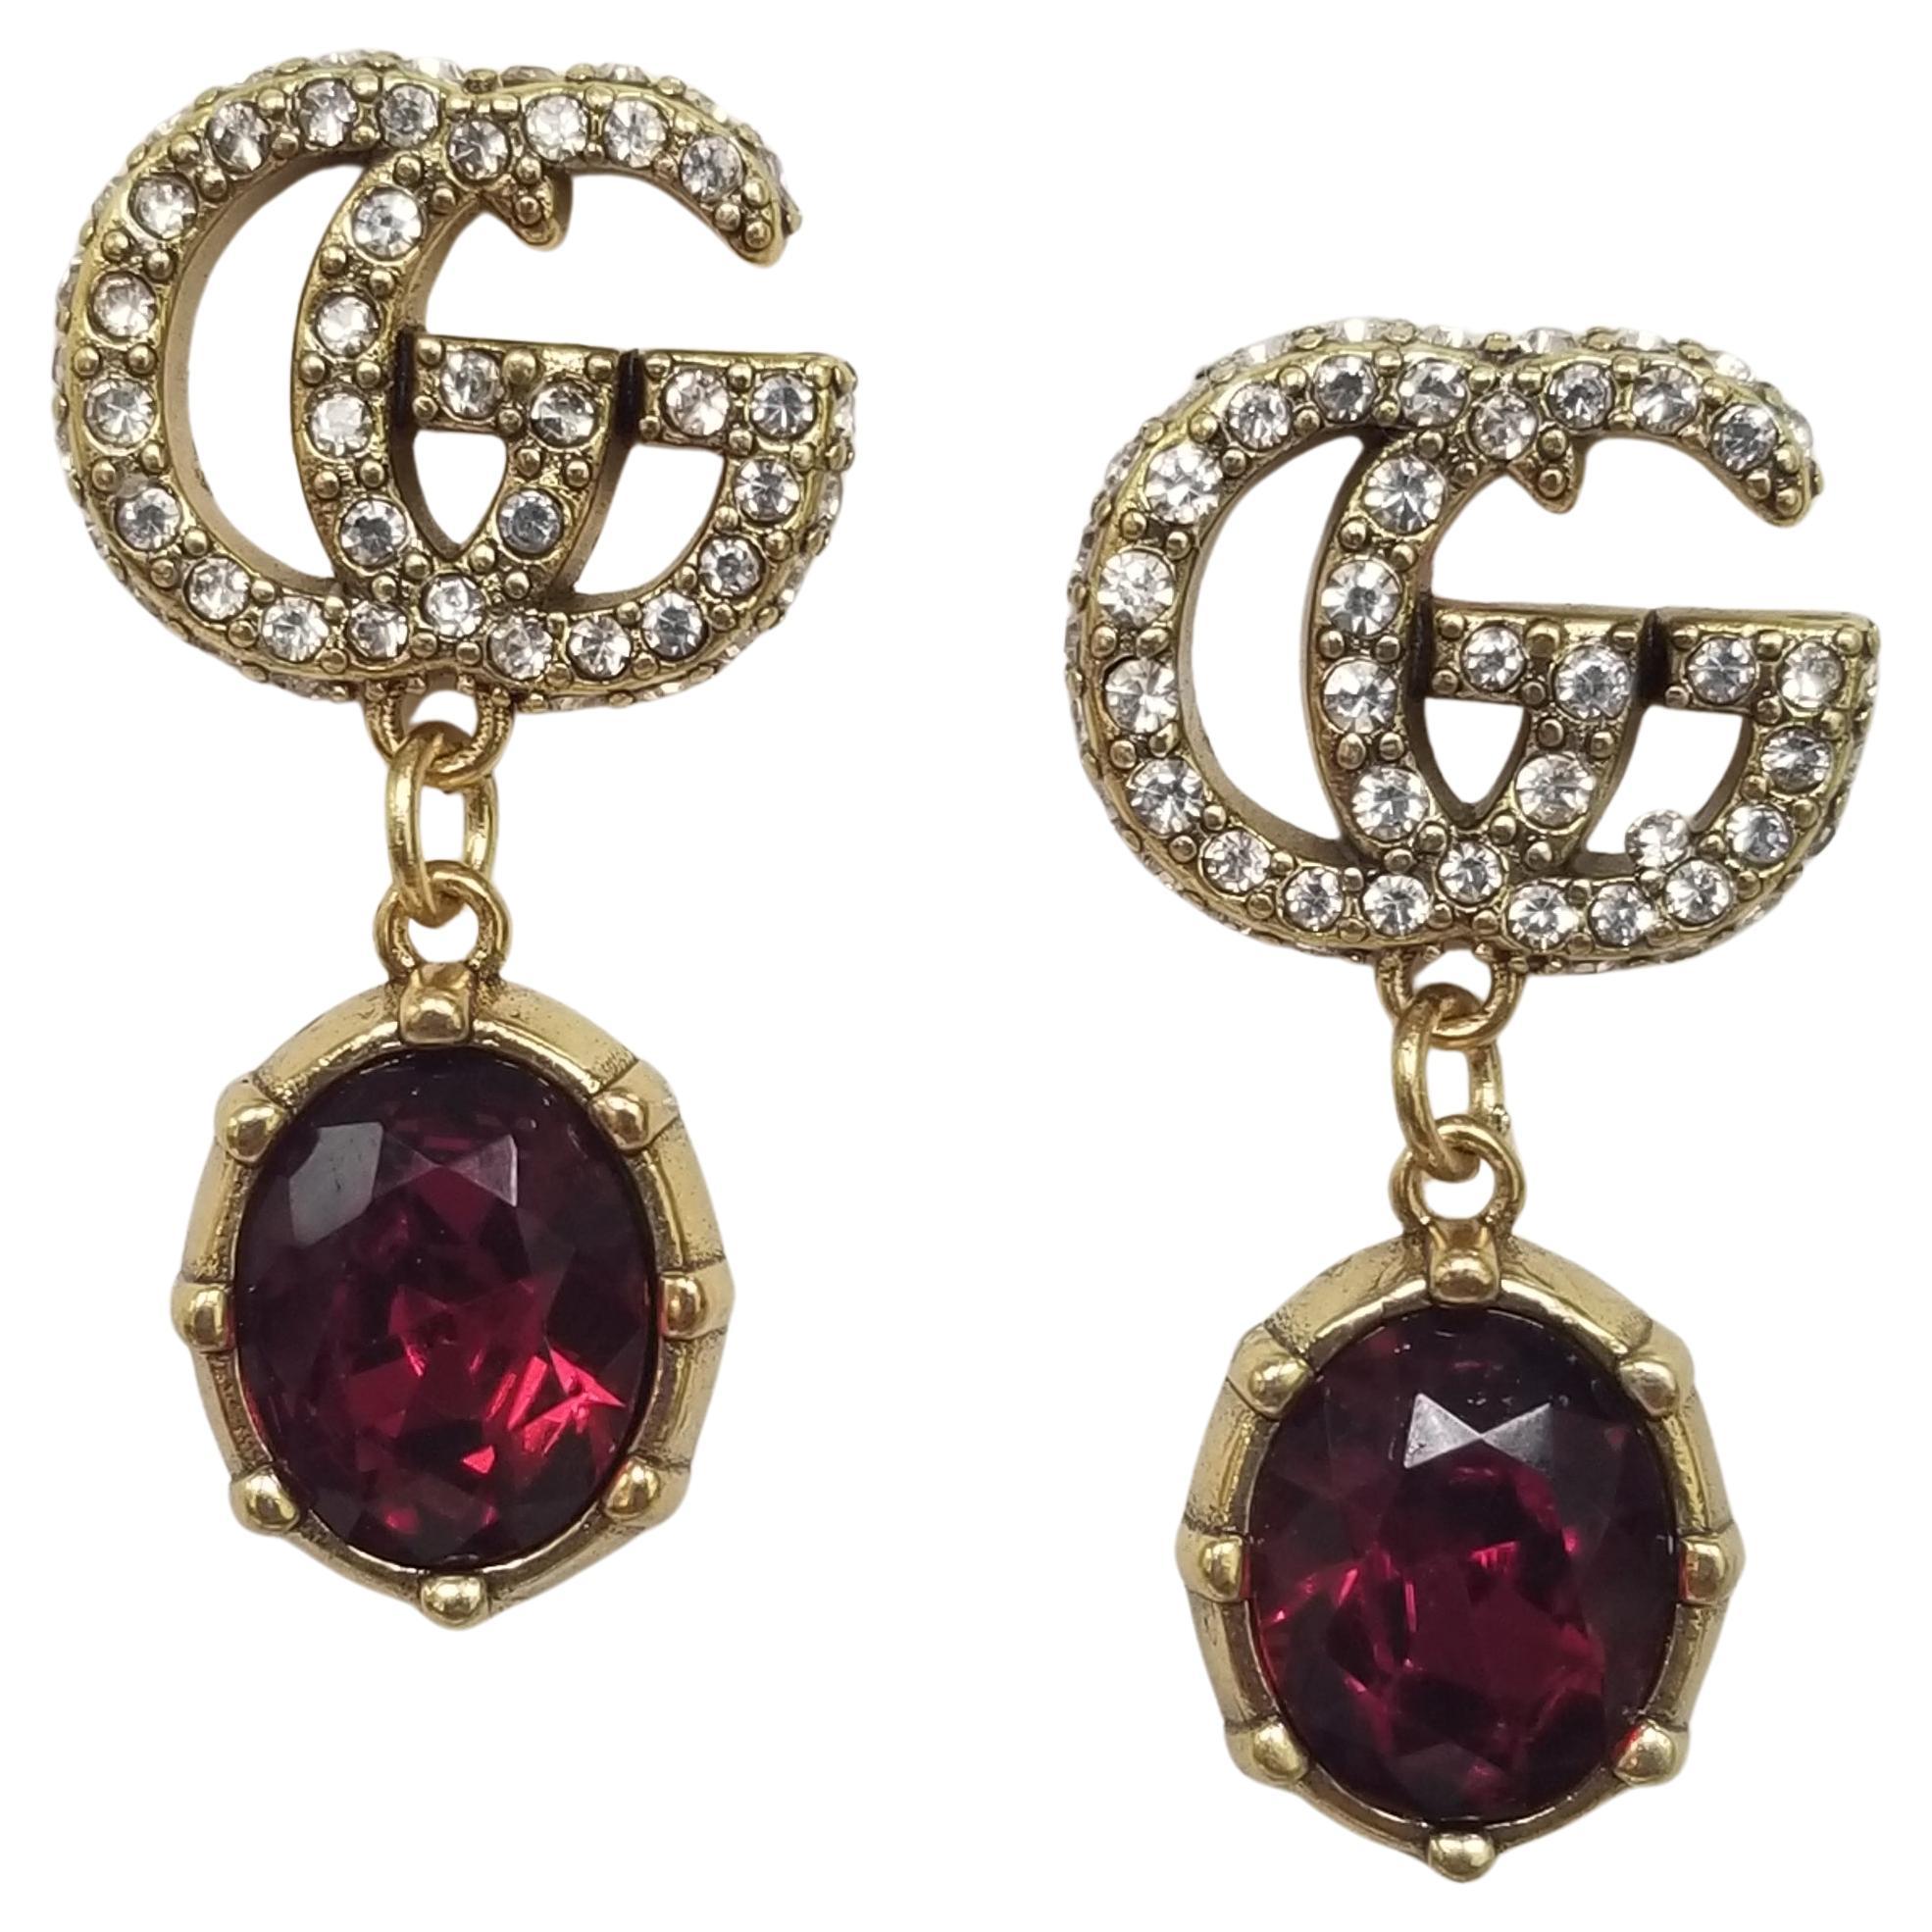 Gucci "GG" Logo in Crystals with Dangling Red Faceted Crystal Earrings